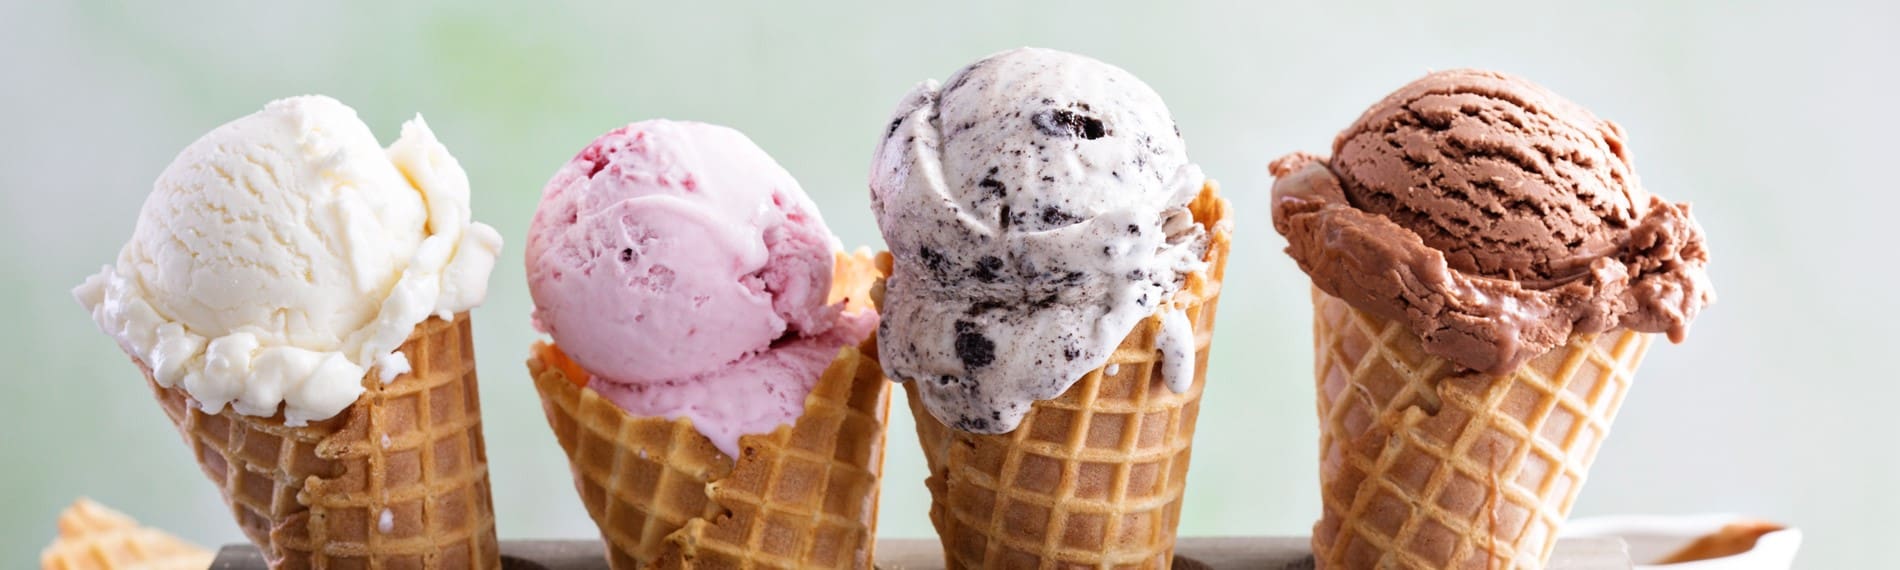 Global Ice Cream Trends: More than just a comfort food?